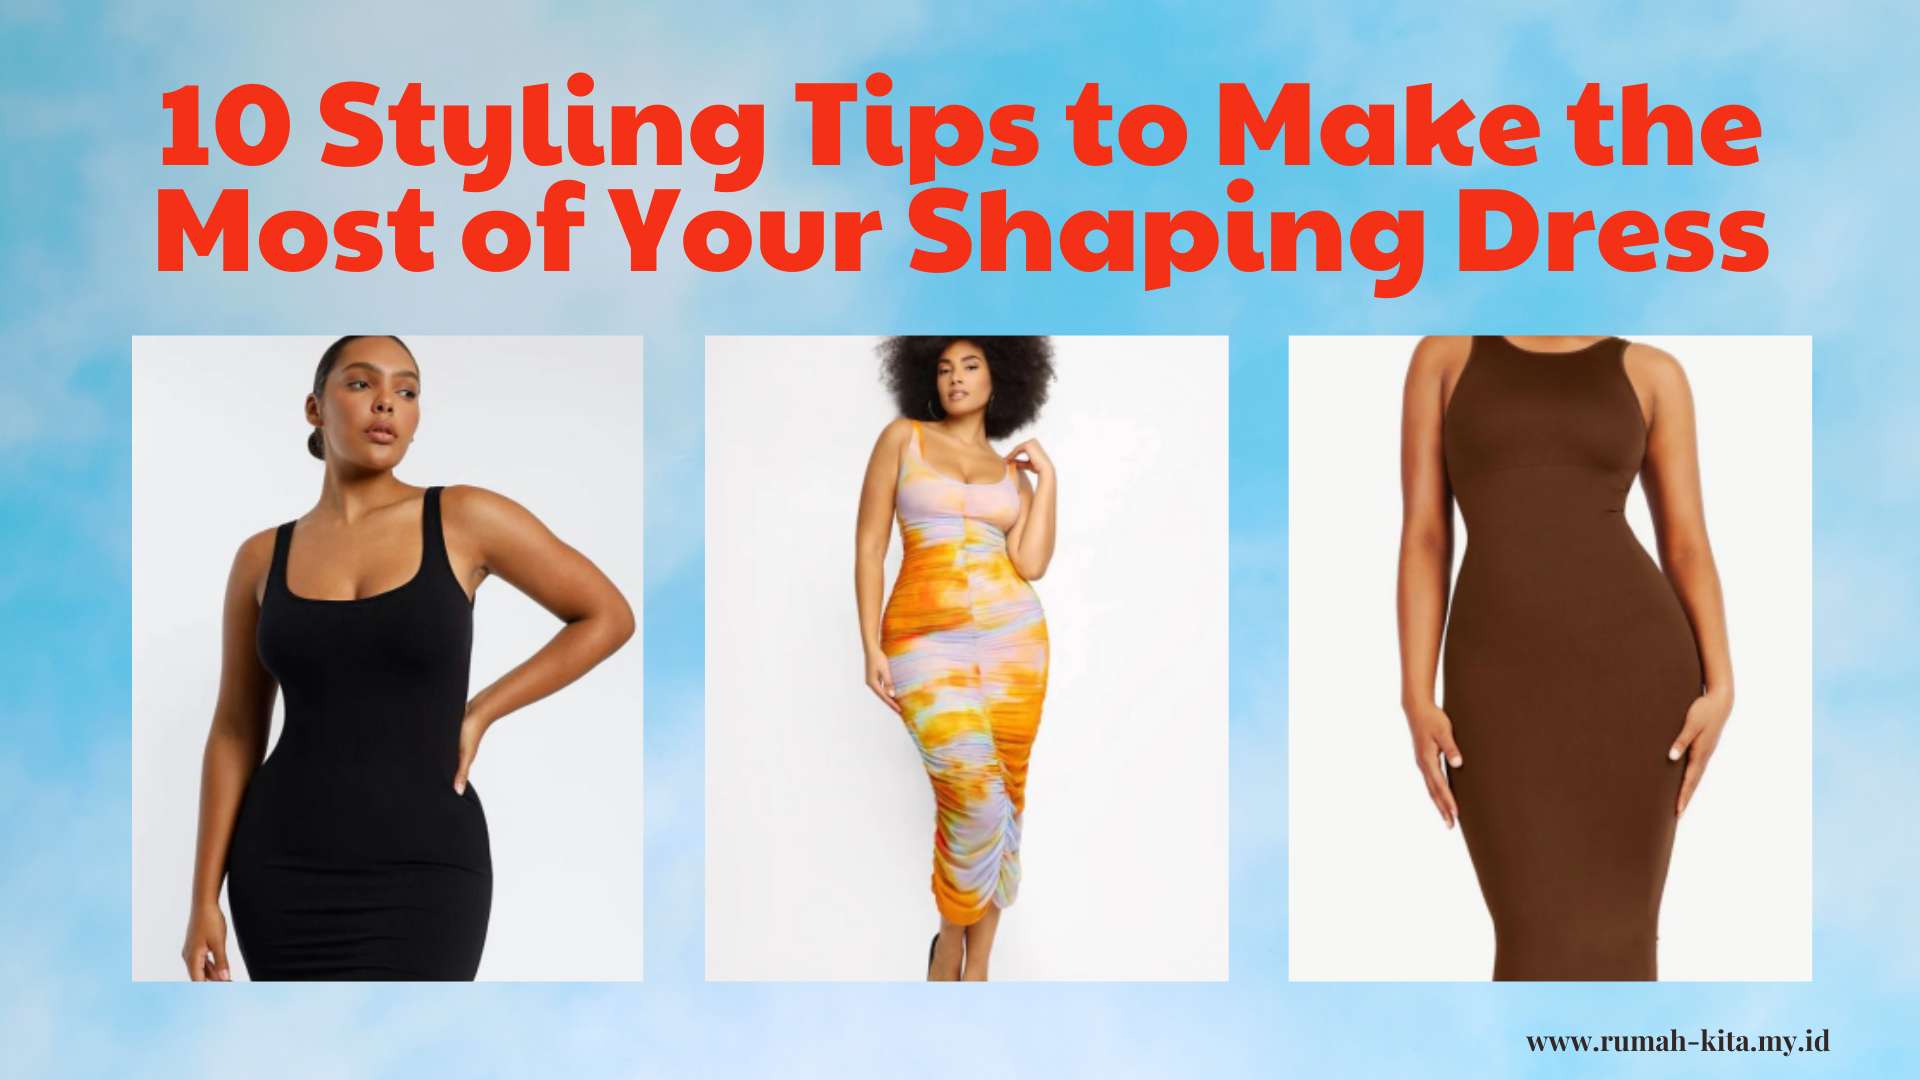 10 Styling Tips to Make the Most of Your Shaping Dress